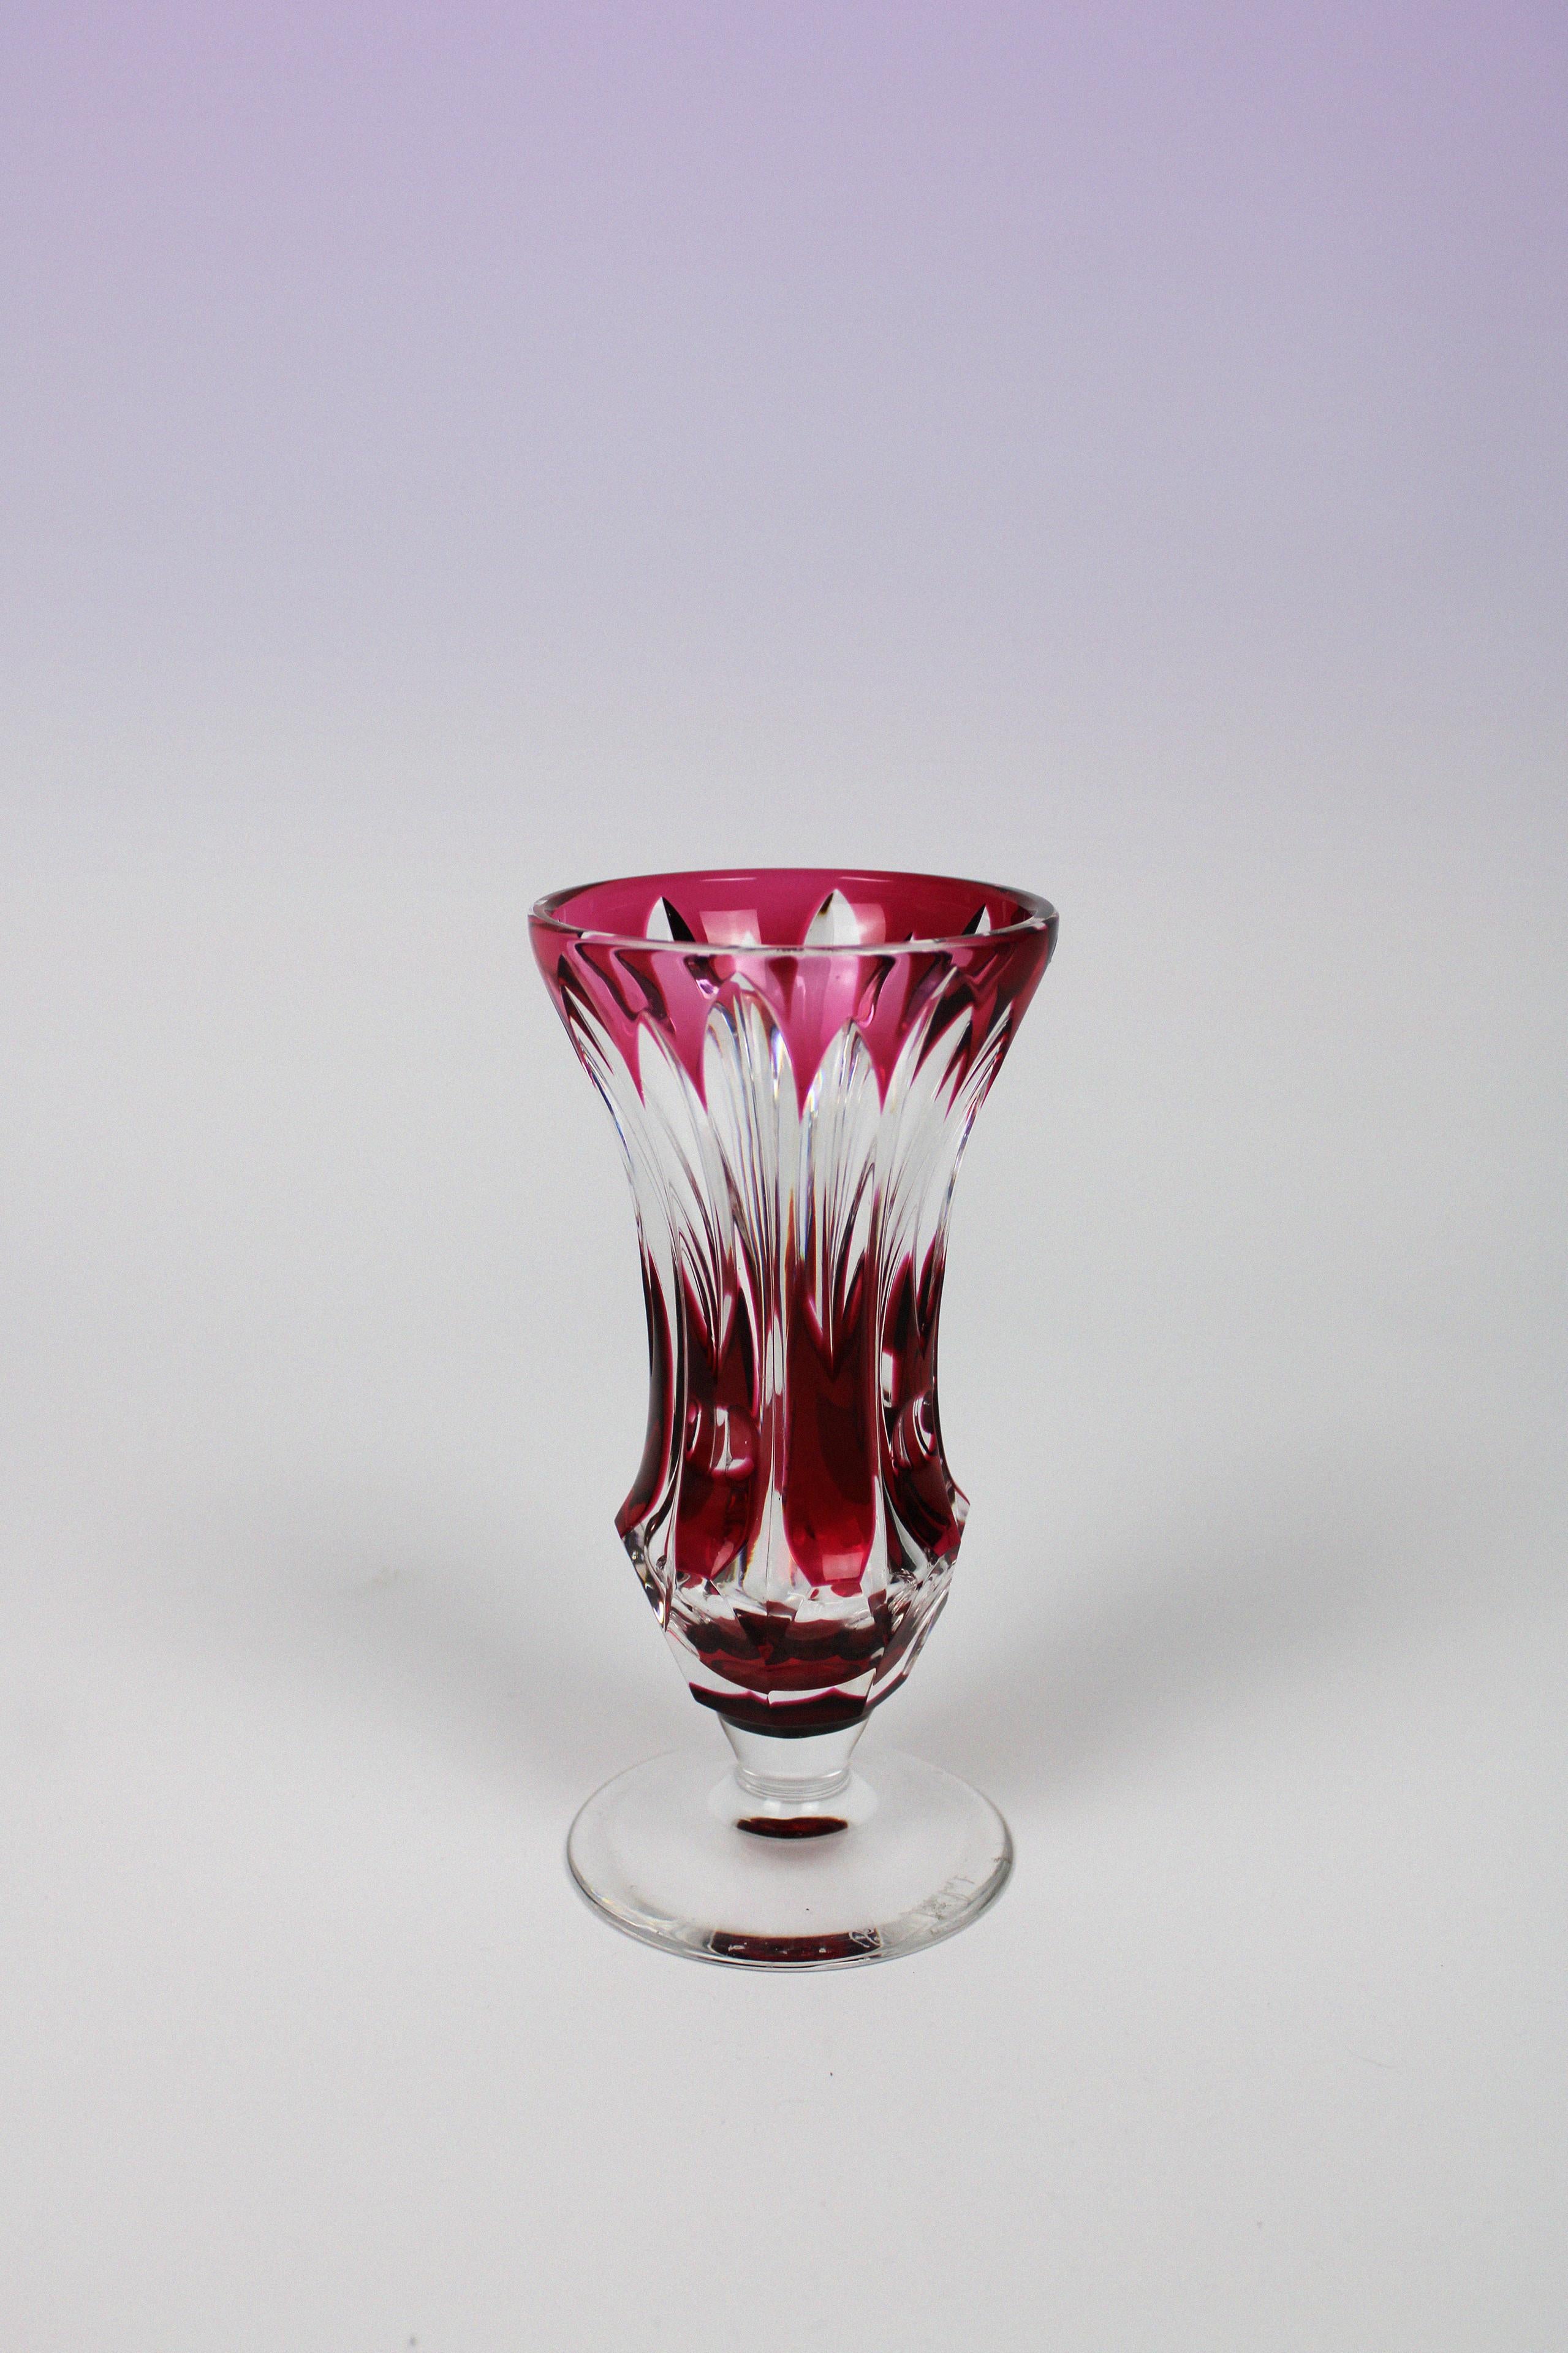 This original and adorable vase by Val St. Lambert, a Belgian manufacture known for their glassware, also shows with this red vase that it is worth the name. The cute shape curved short with a relief that varies between the red and transparent glass